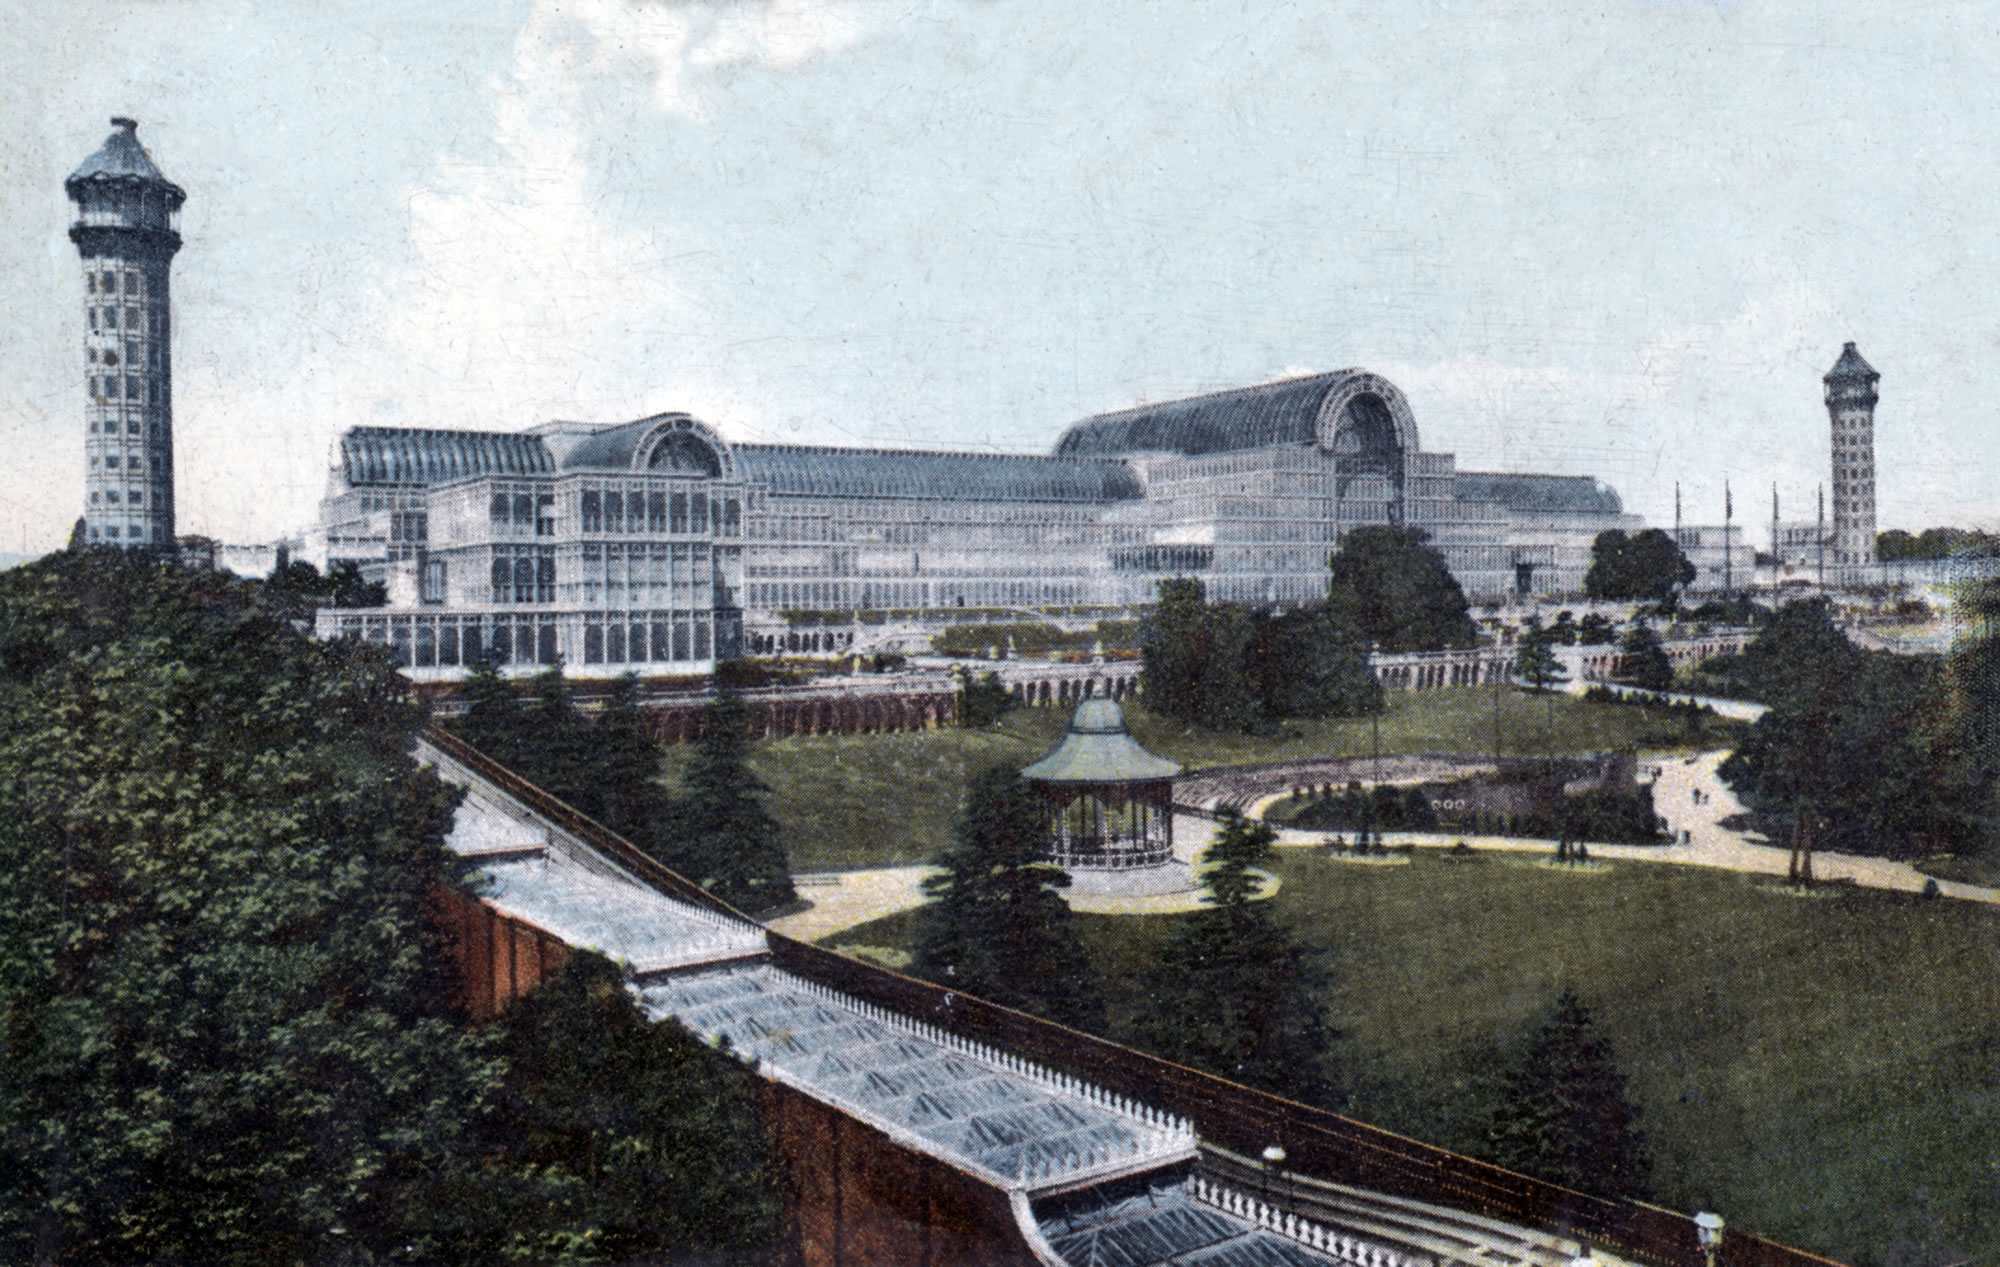 The Crystal Palace and Grounds from TheGenealogist's Image Archive